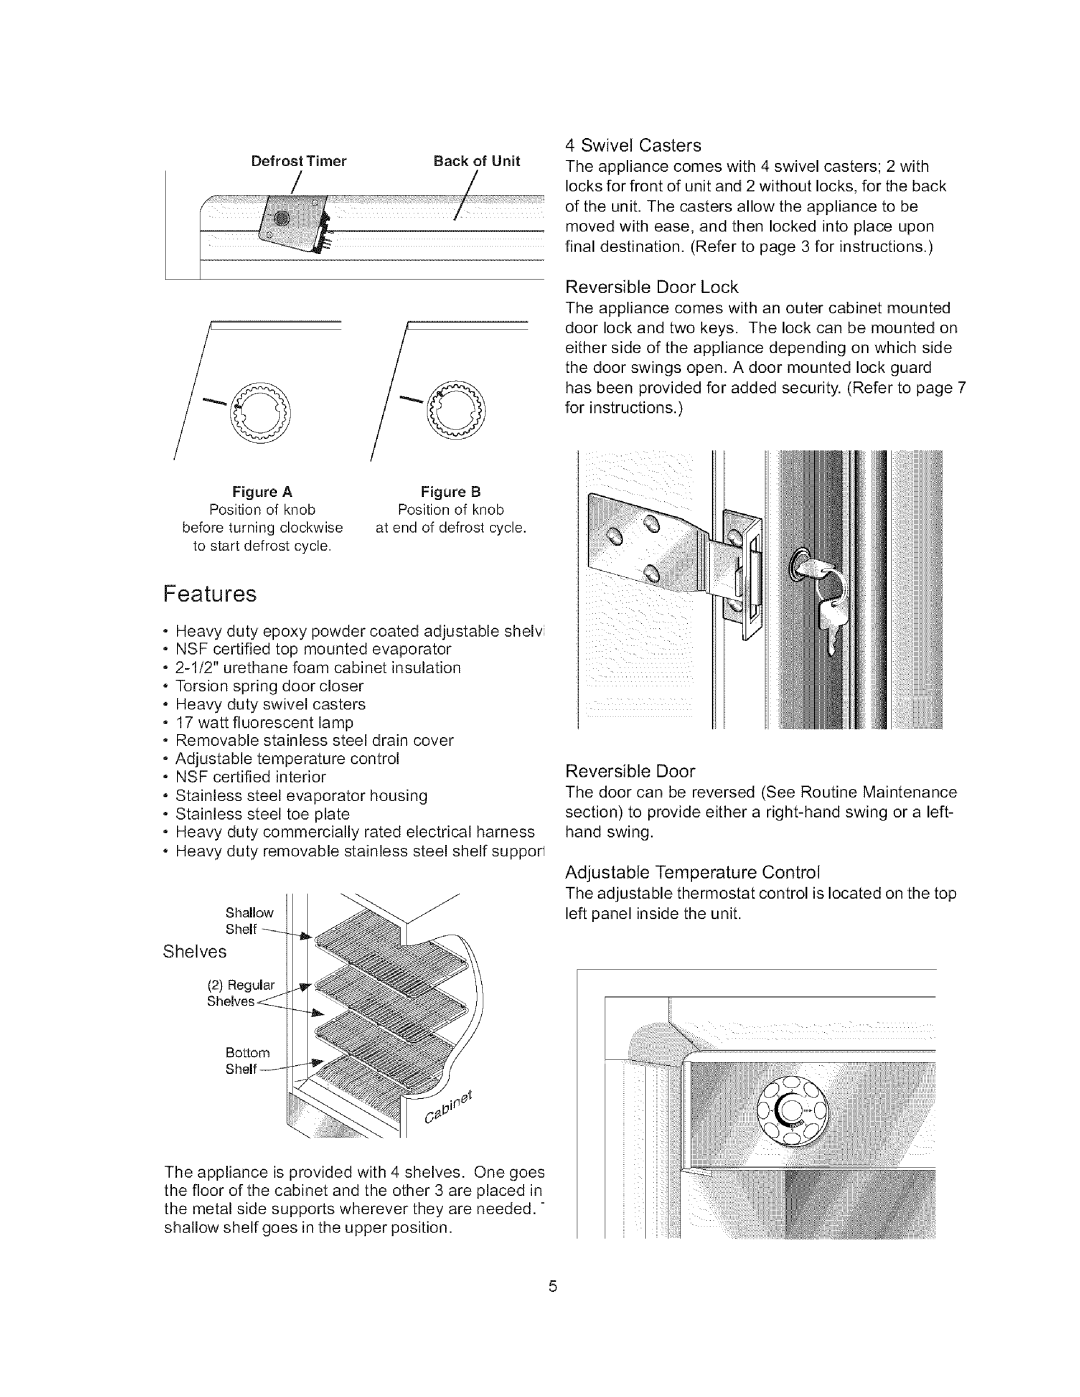 Arctic Air Refrigerator important safety instructions BackofUnit, Features, DefrostTimer 